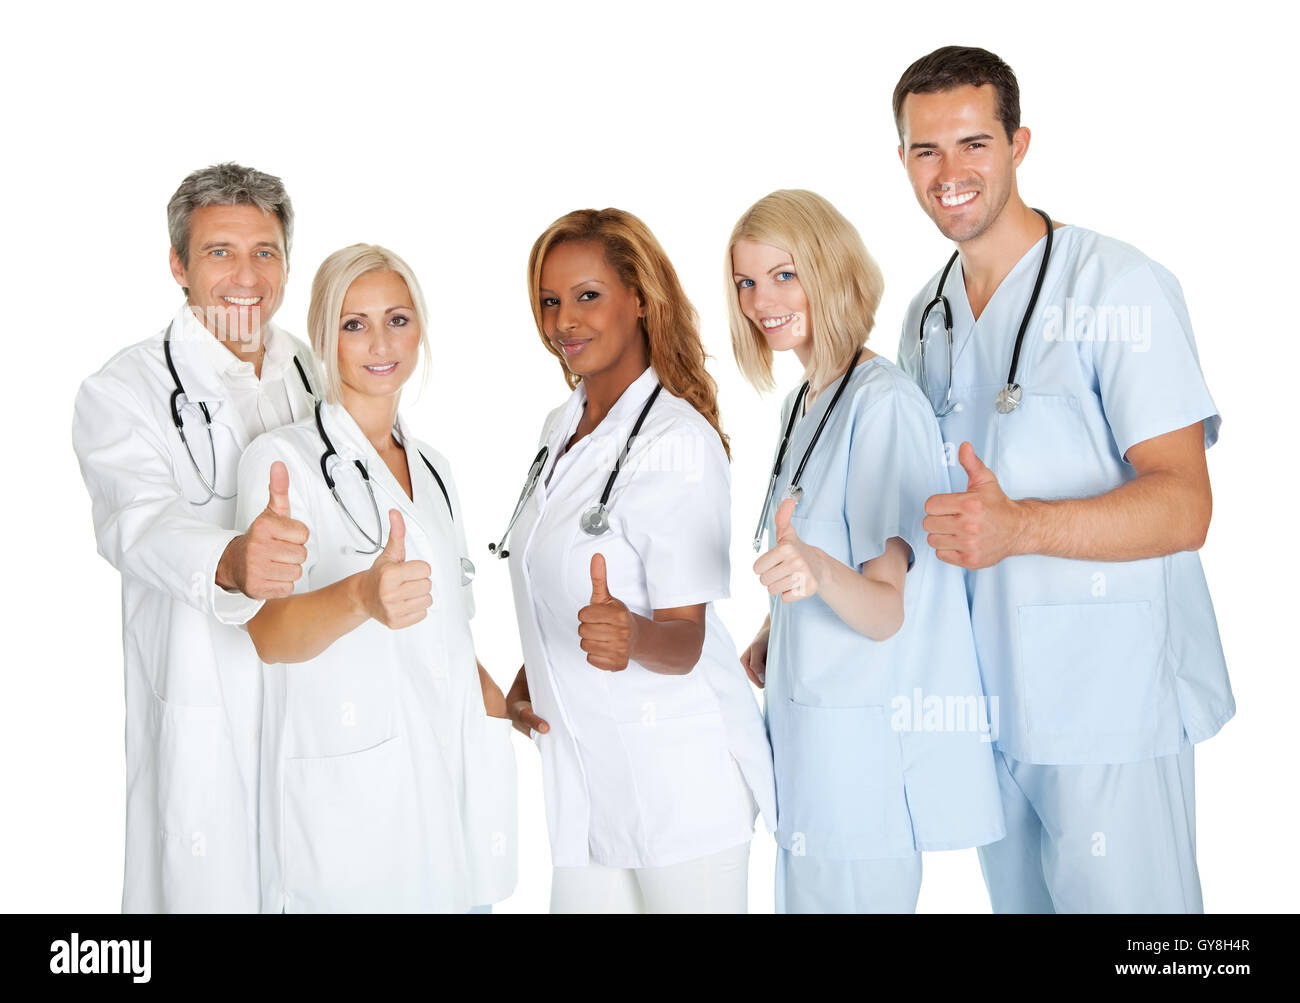 Group of doctors giving thumbs up sign over white Stock Photo